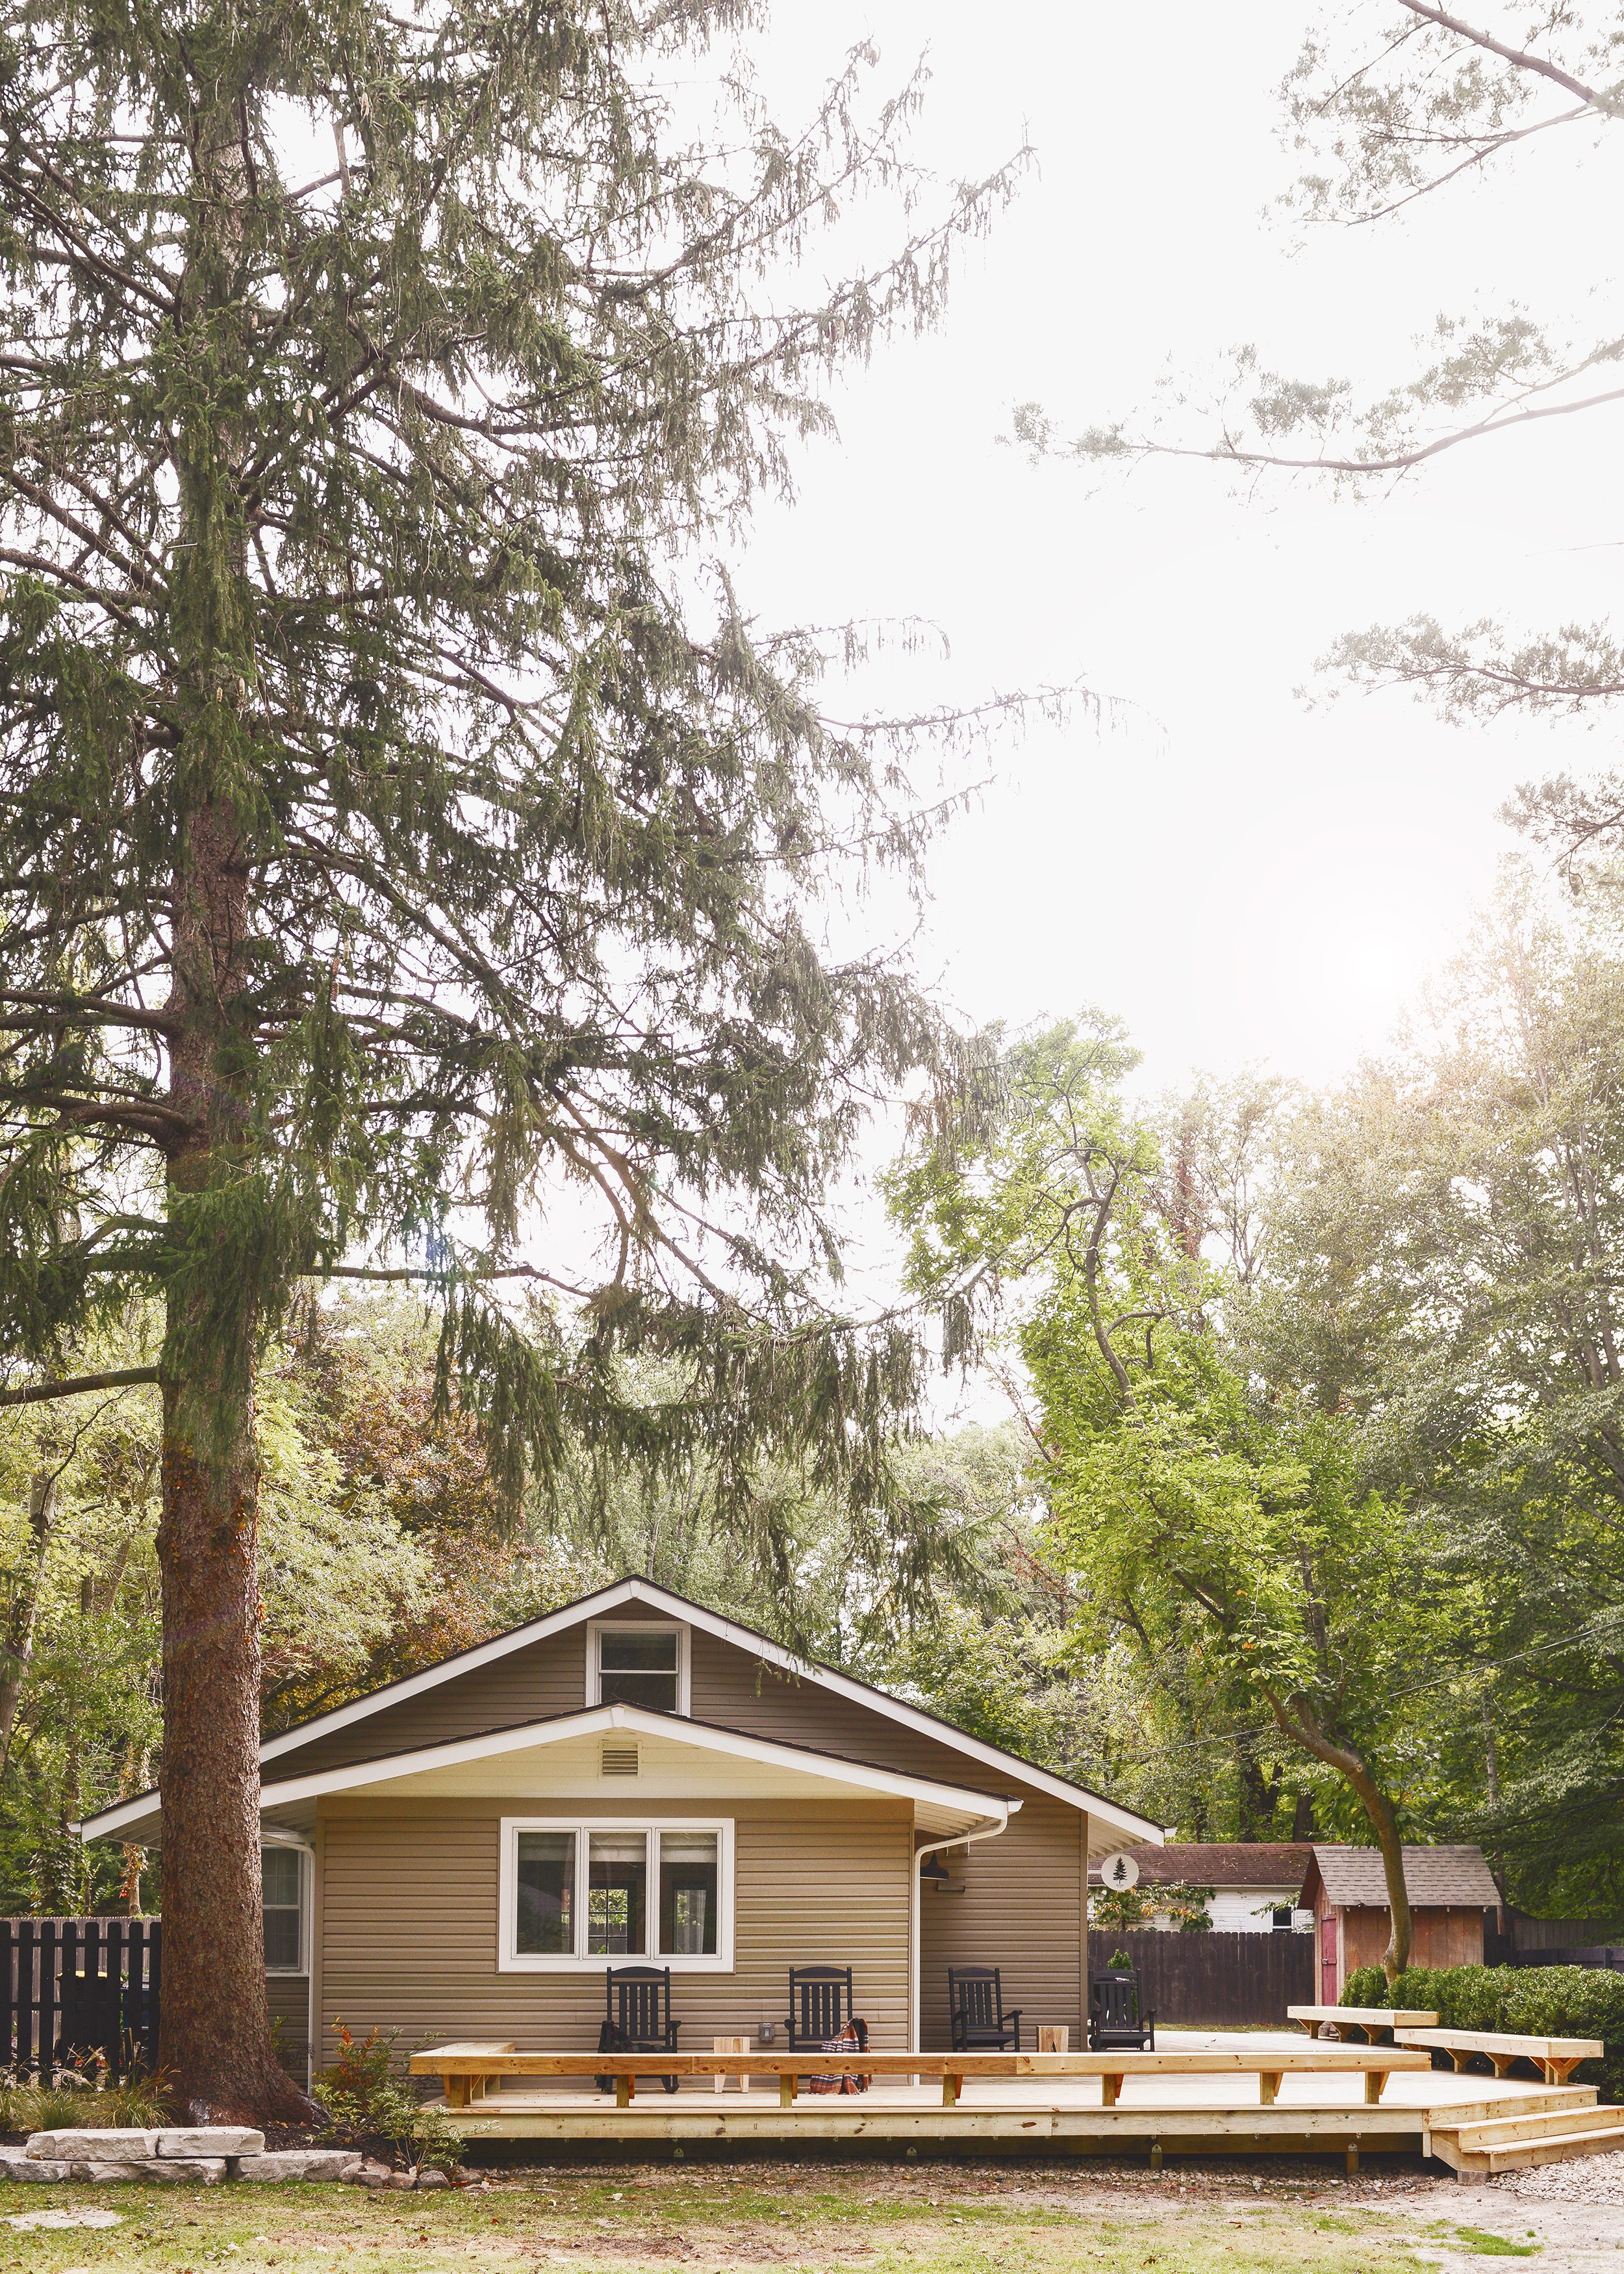 Exterior upgrades at our Michigan Tree House, in partnership with Lowe's Home Improvement | via Yellow Brick Home | outdoor design and inspiration on a budget